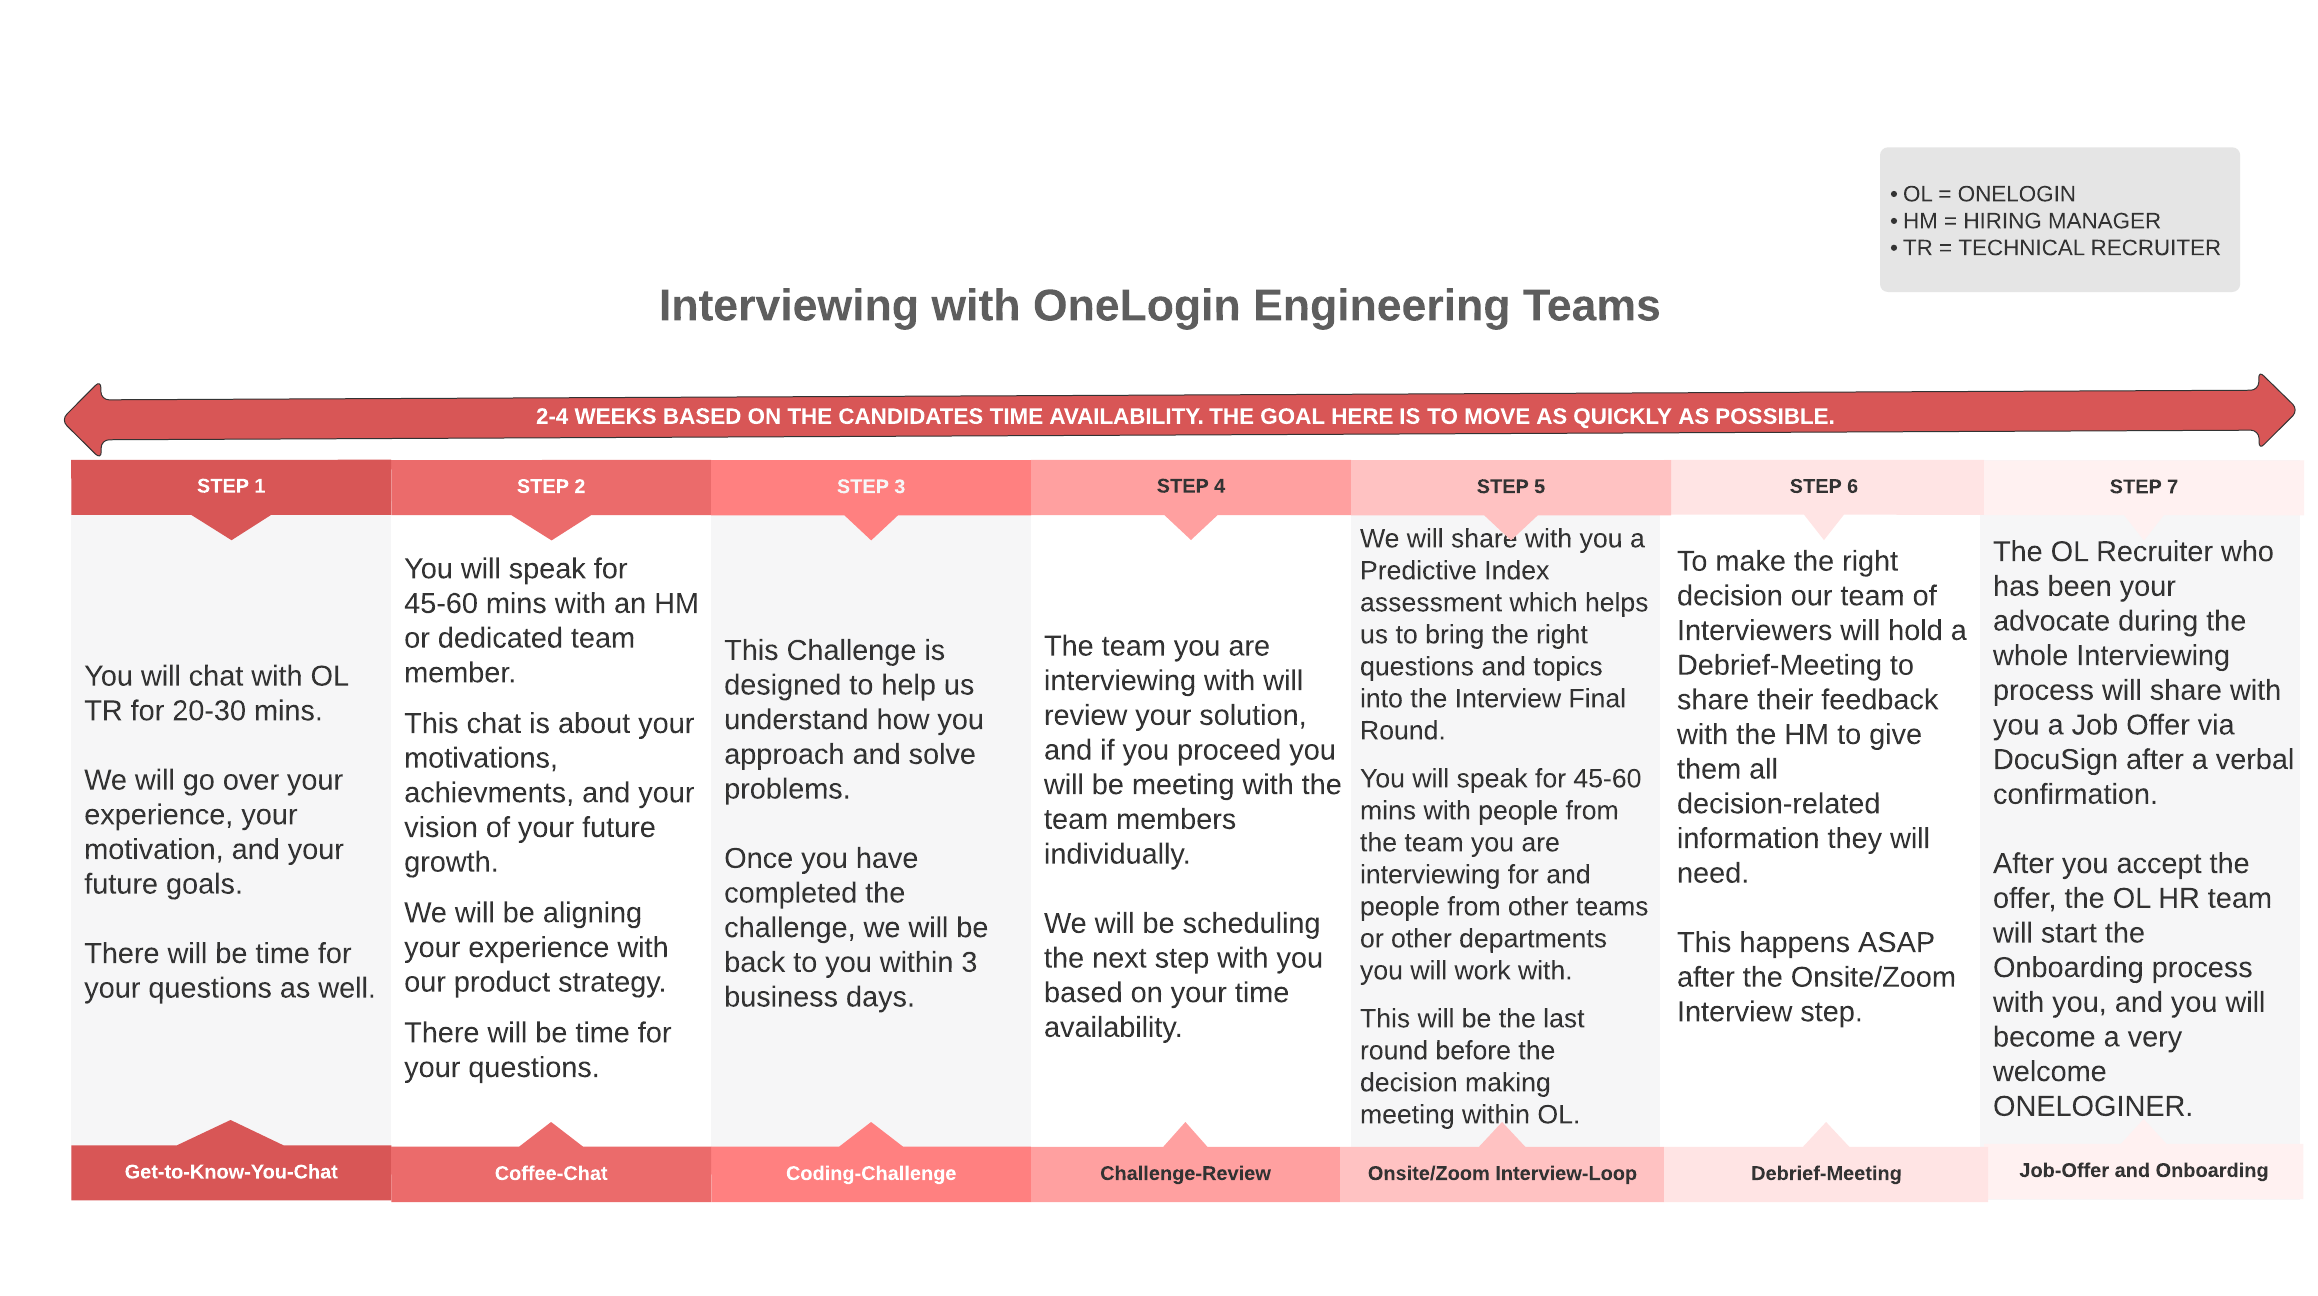 Overview of the interview process